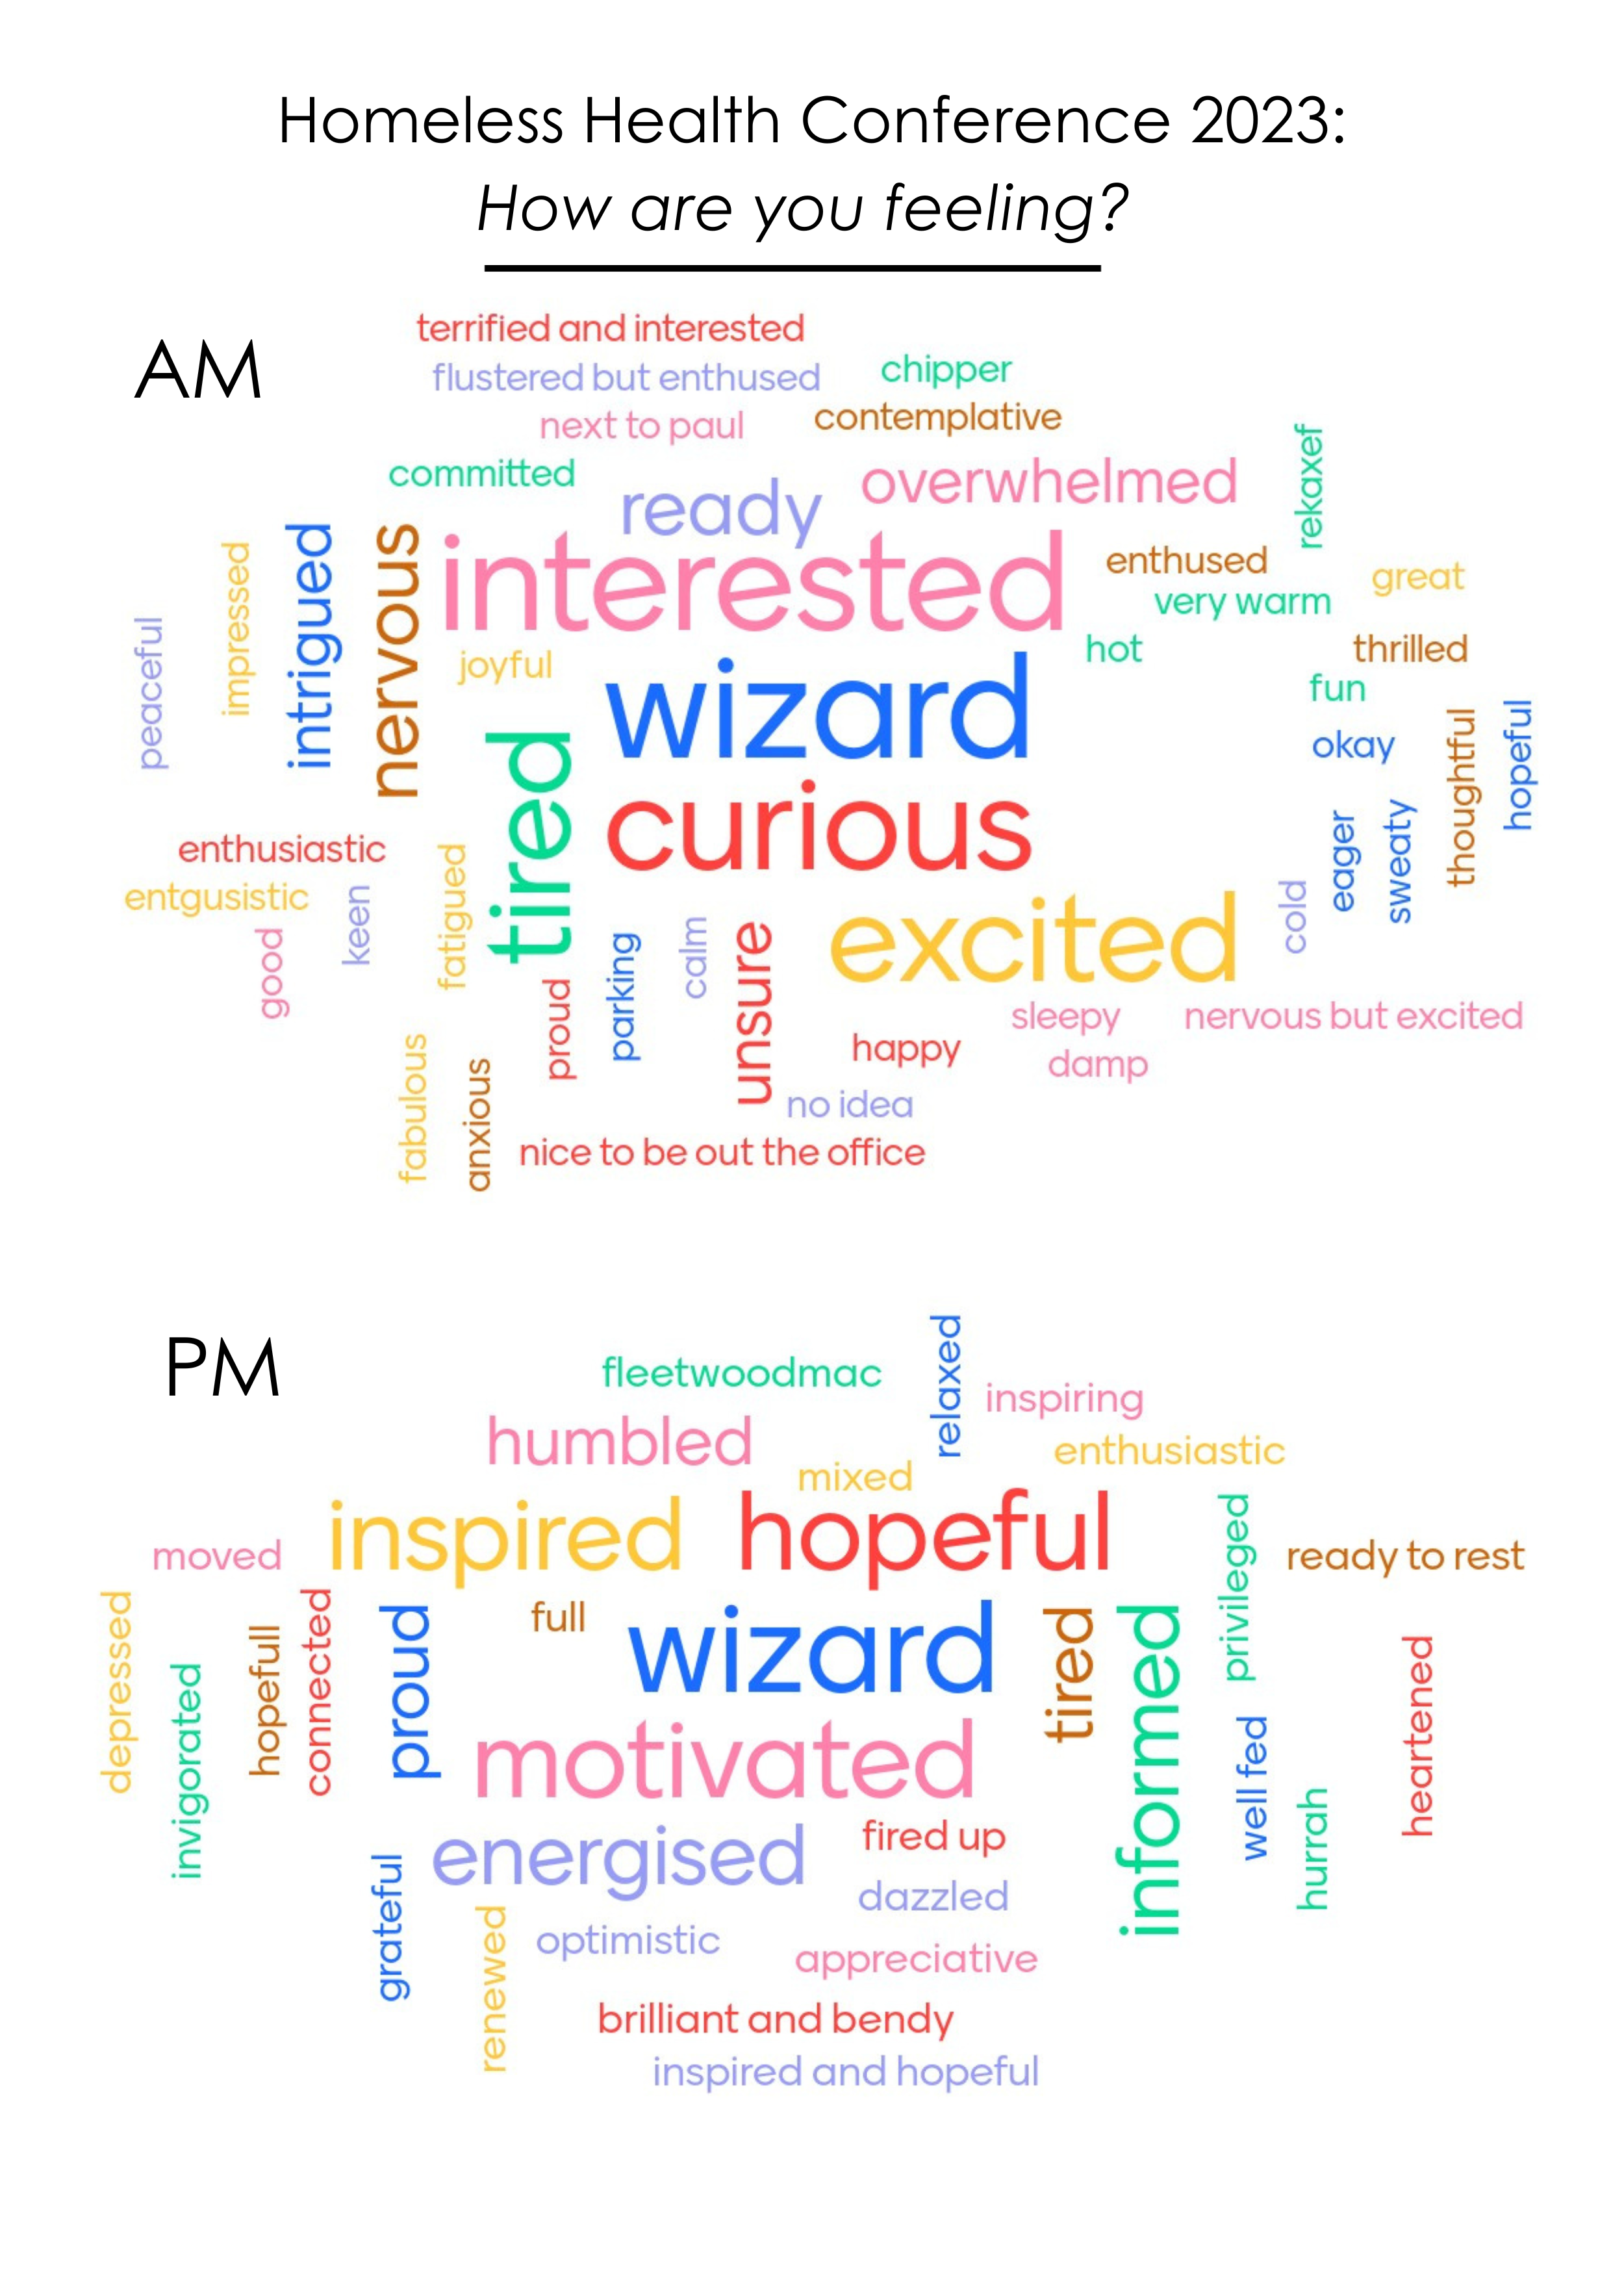 Word cloud with feelings of people attending the 2023 Homeless Health Conference, morning versus afternoon. Morning words include nervous, excited, curious, thoughtful, interested, eager. PM words include humbled, proud, inspired, energised, informed, tired, heartened.